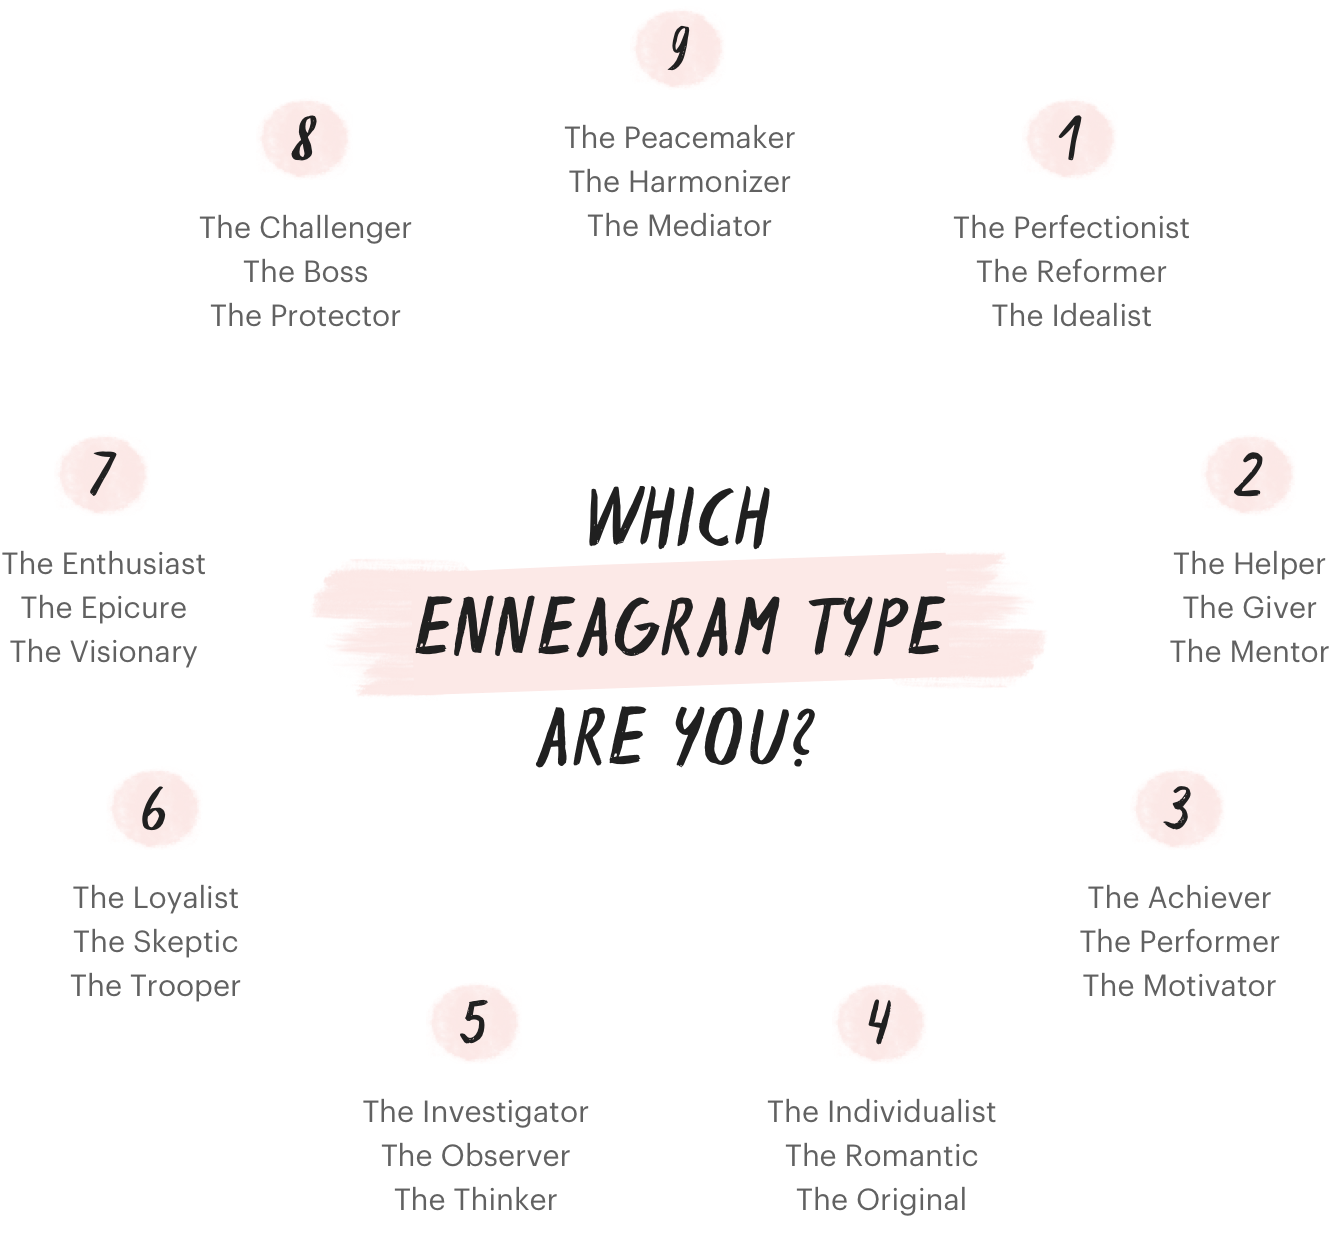 The 9 Enneagram types. Which one are you?